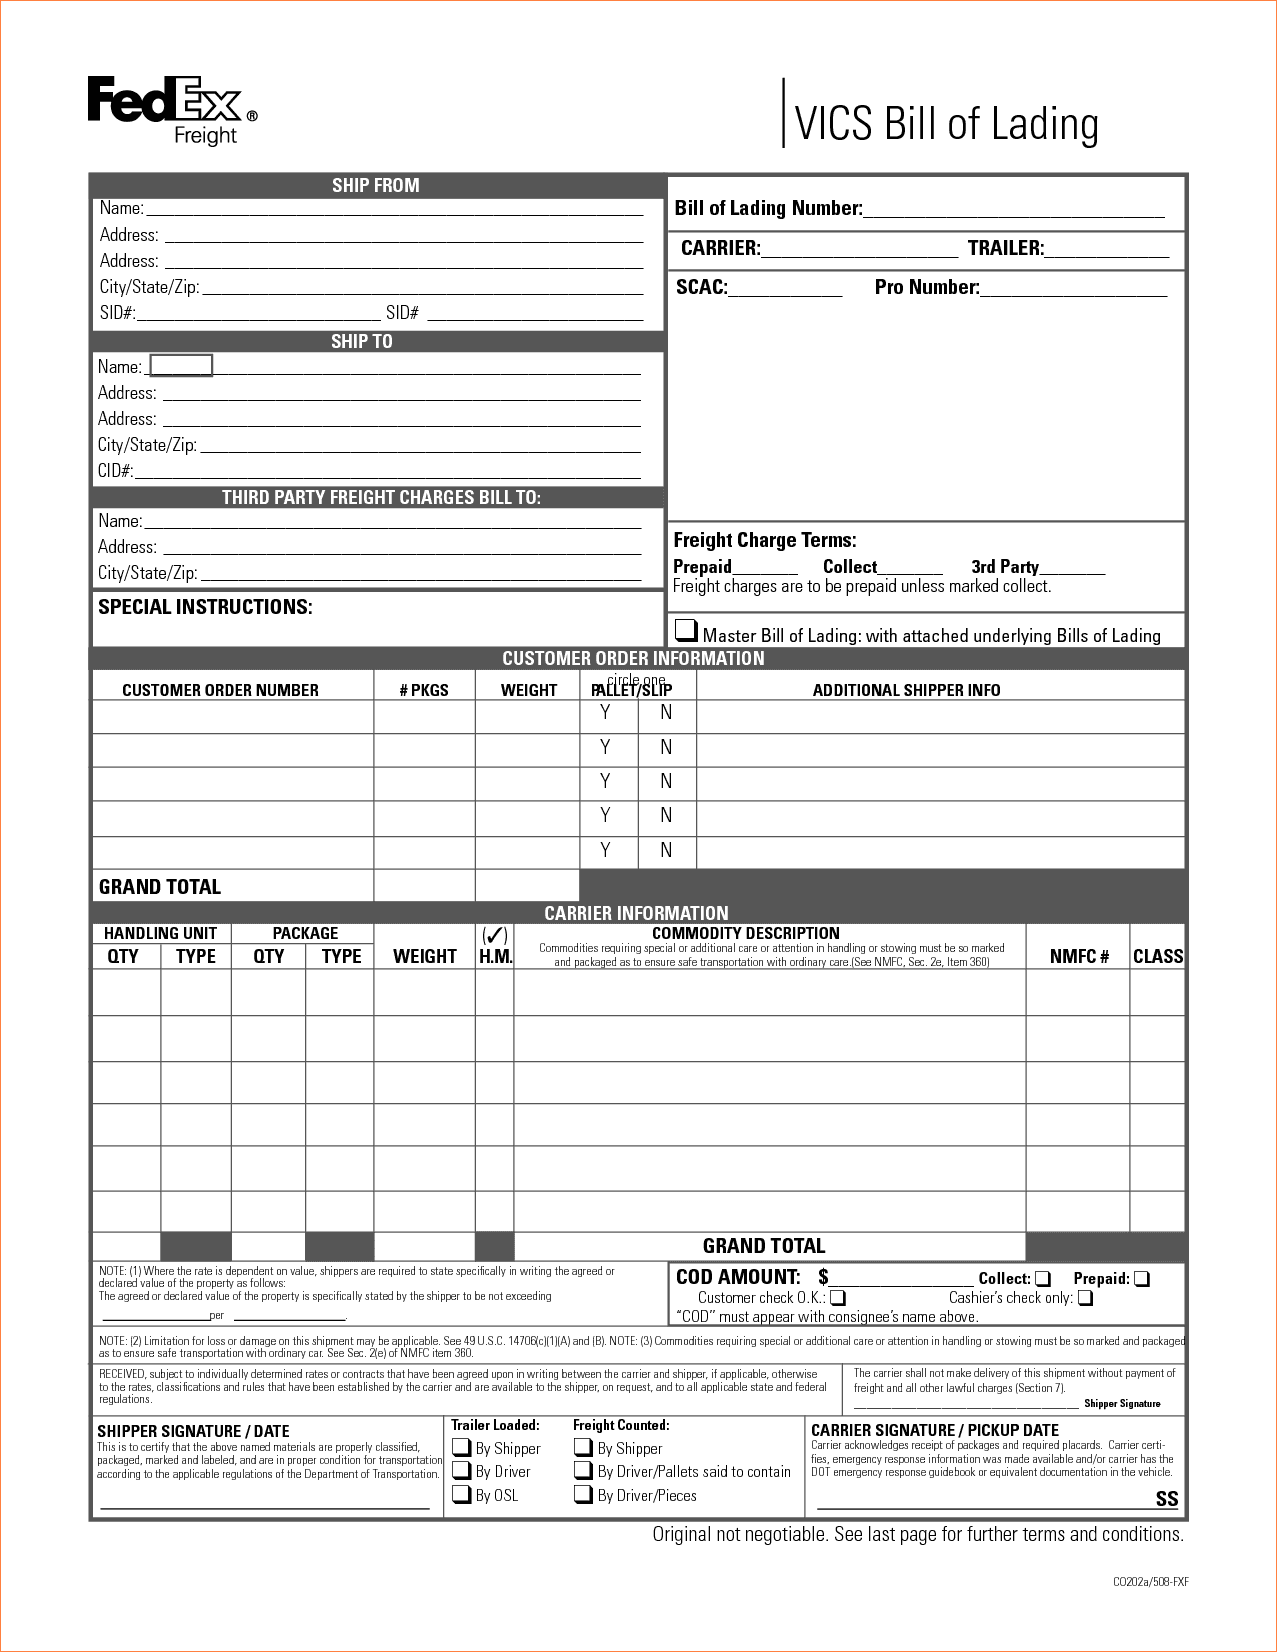 VICS Standard Bill Of Lading Form And Free Printable Bill Lading Form